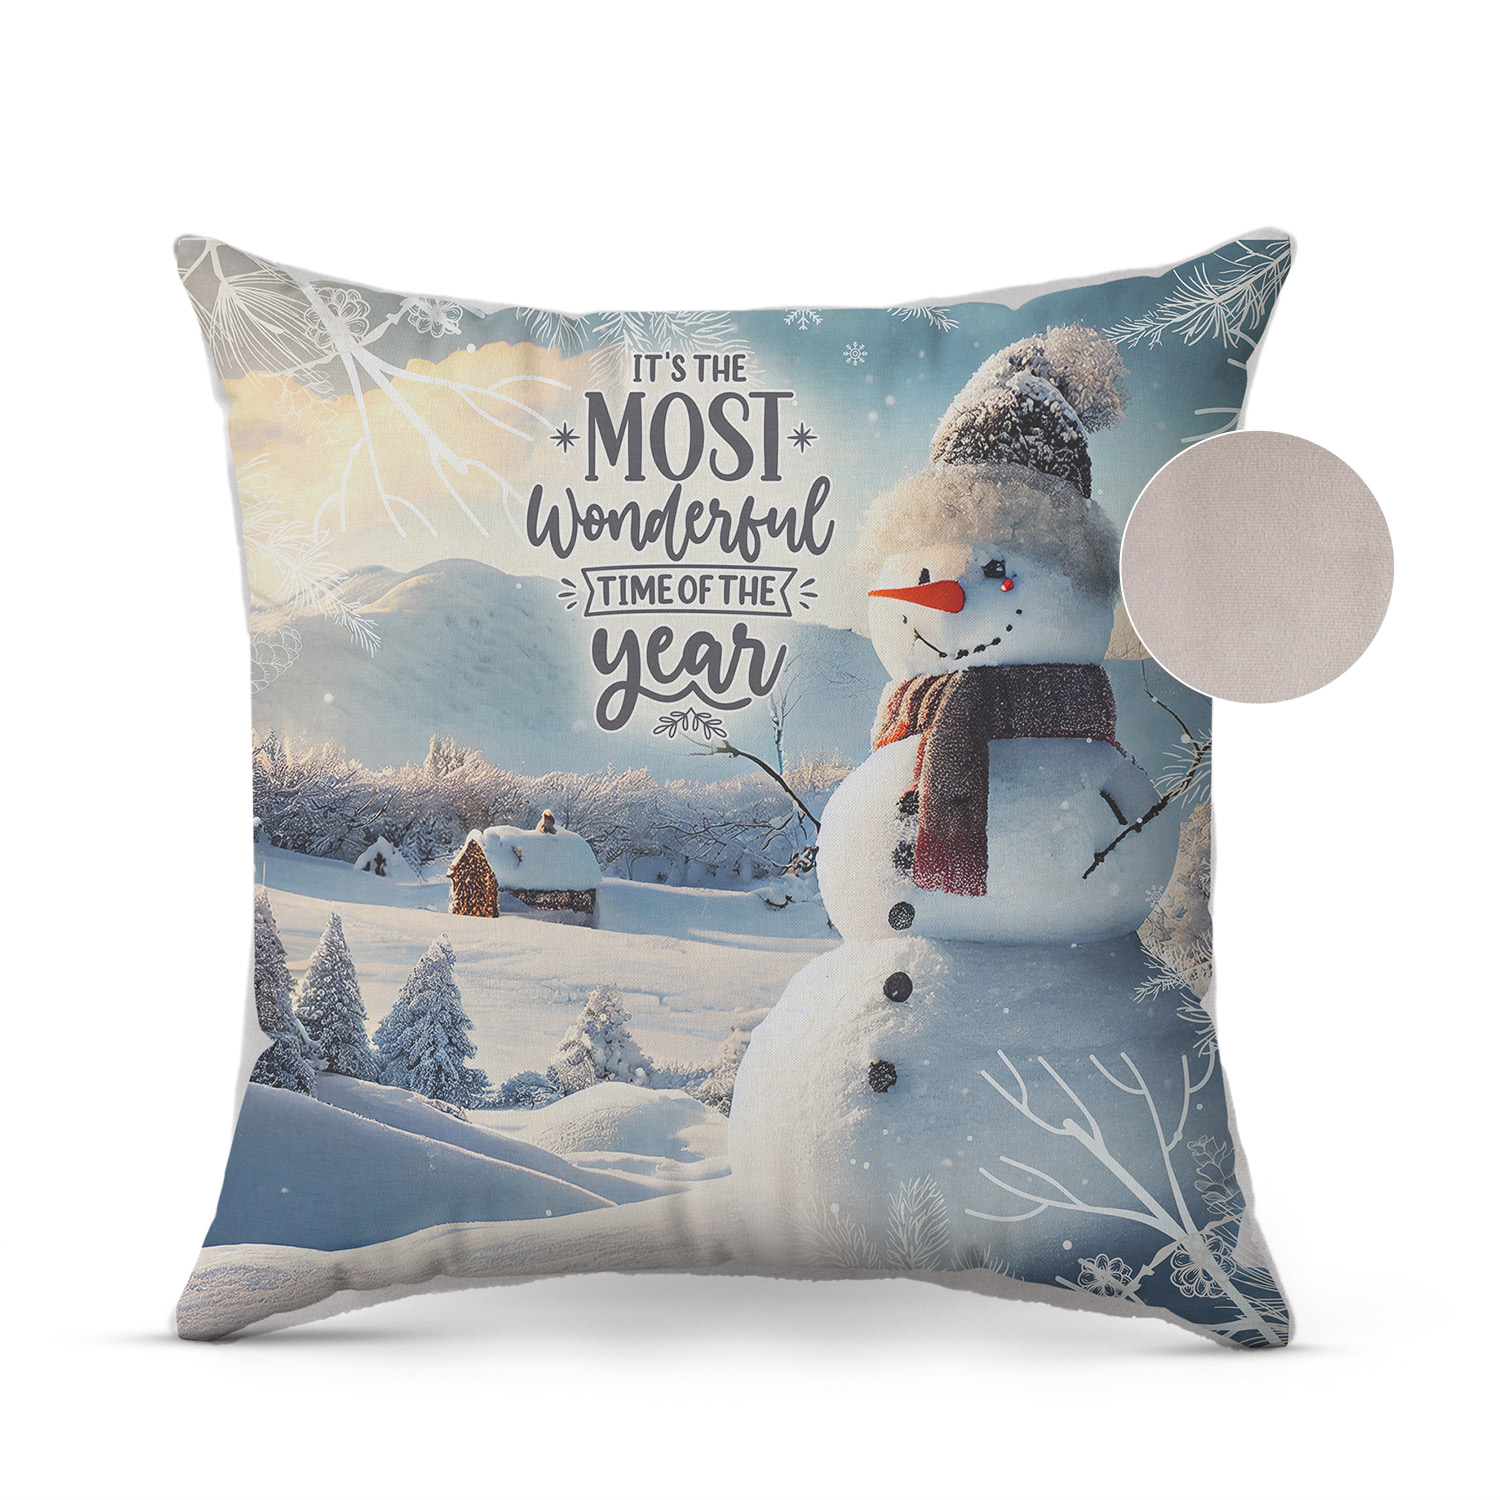 Christmas pillow with Snowman